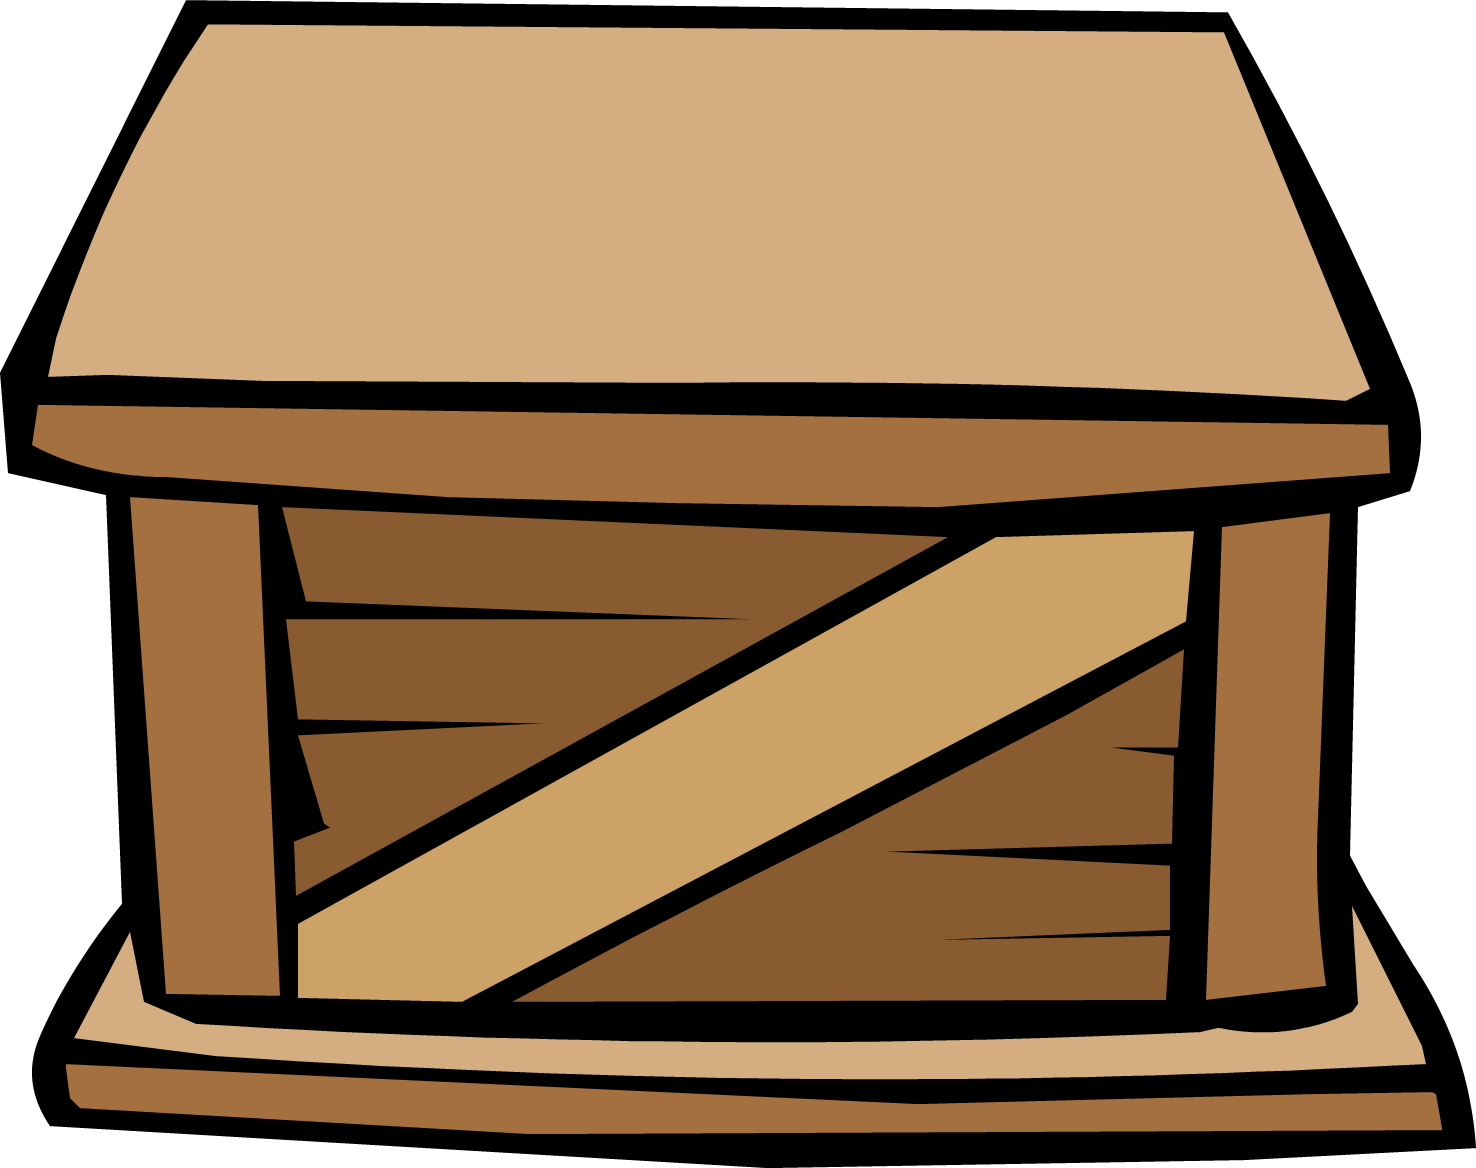 Box Wooden Crate Transparent Image